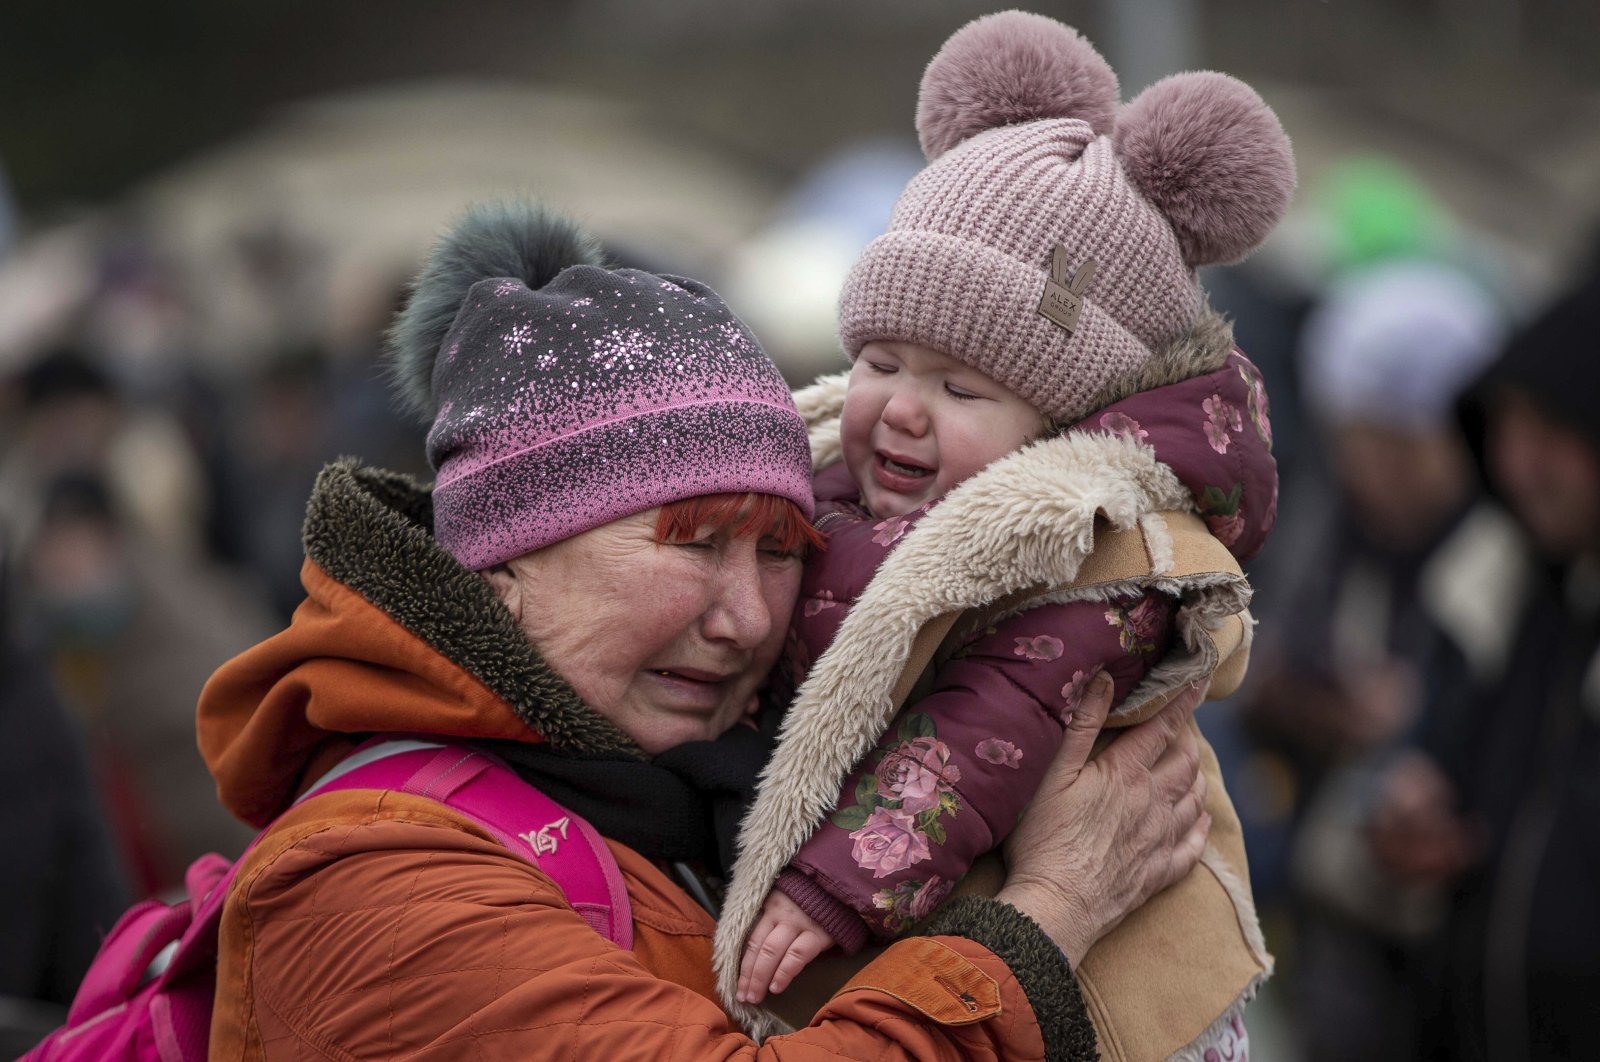 A woman holding a child cries after fleeing from Ukraine and arriving at the border crossing in Medyka, Poland, March 7, 2022. (AP Photo)